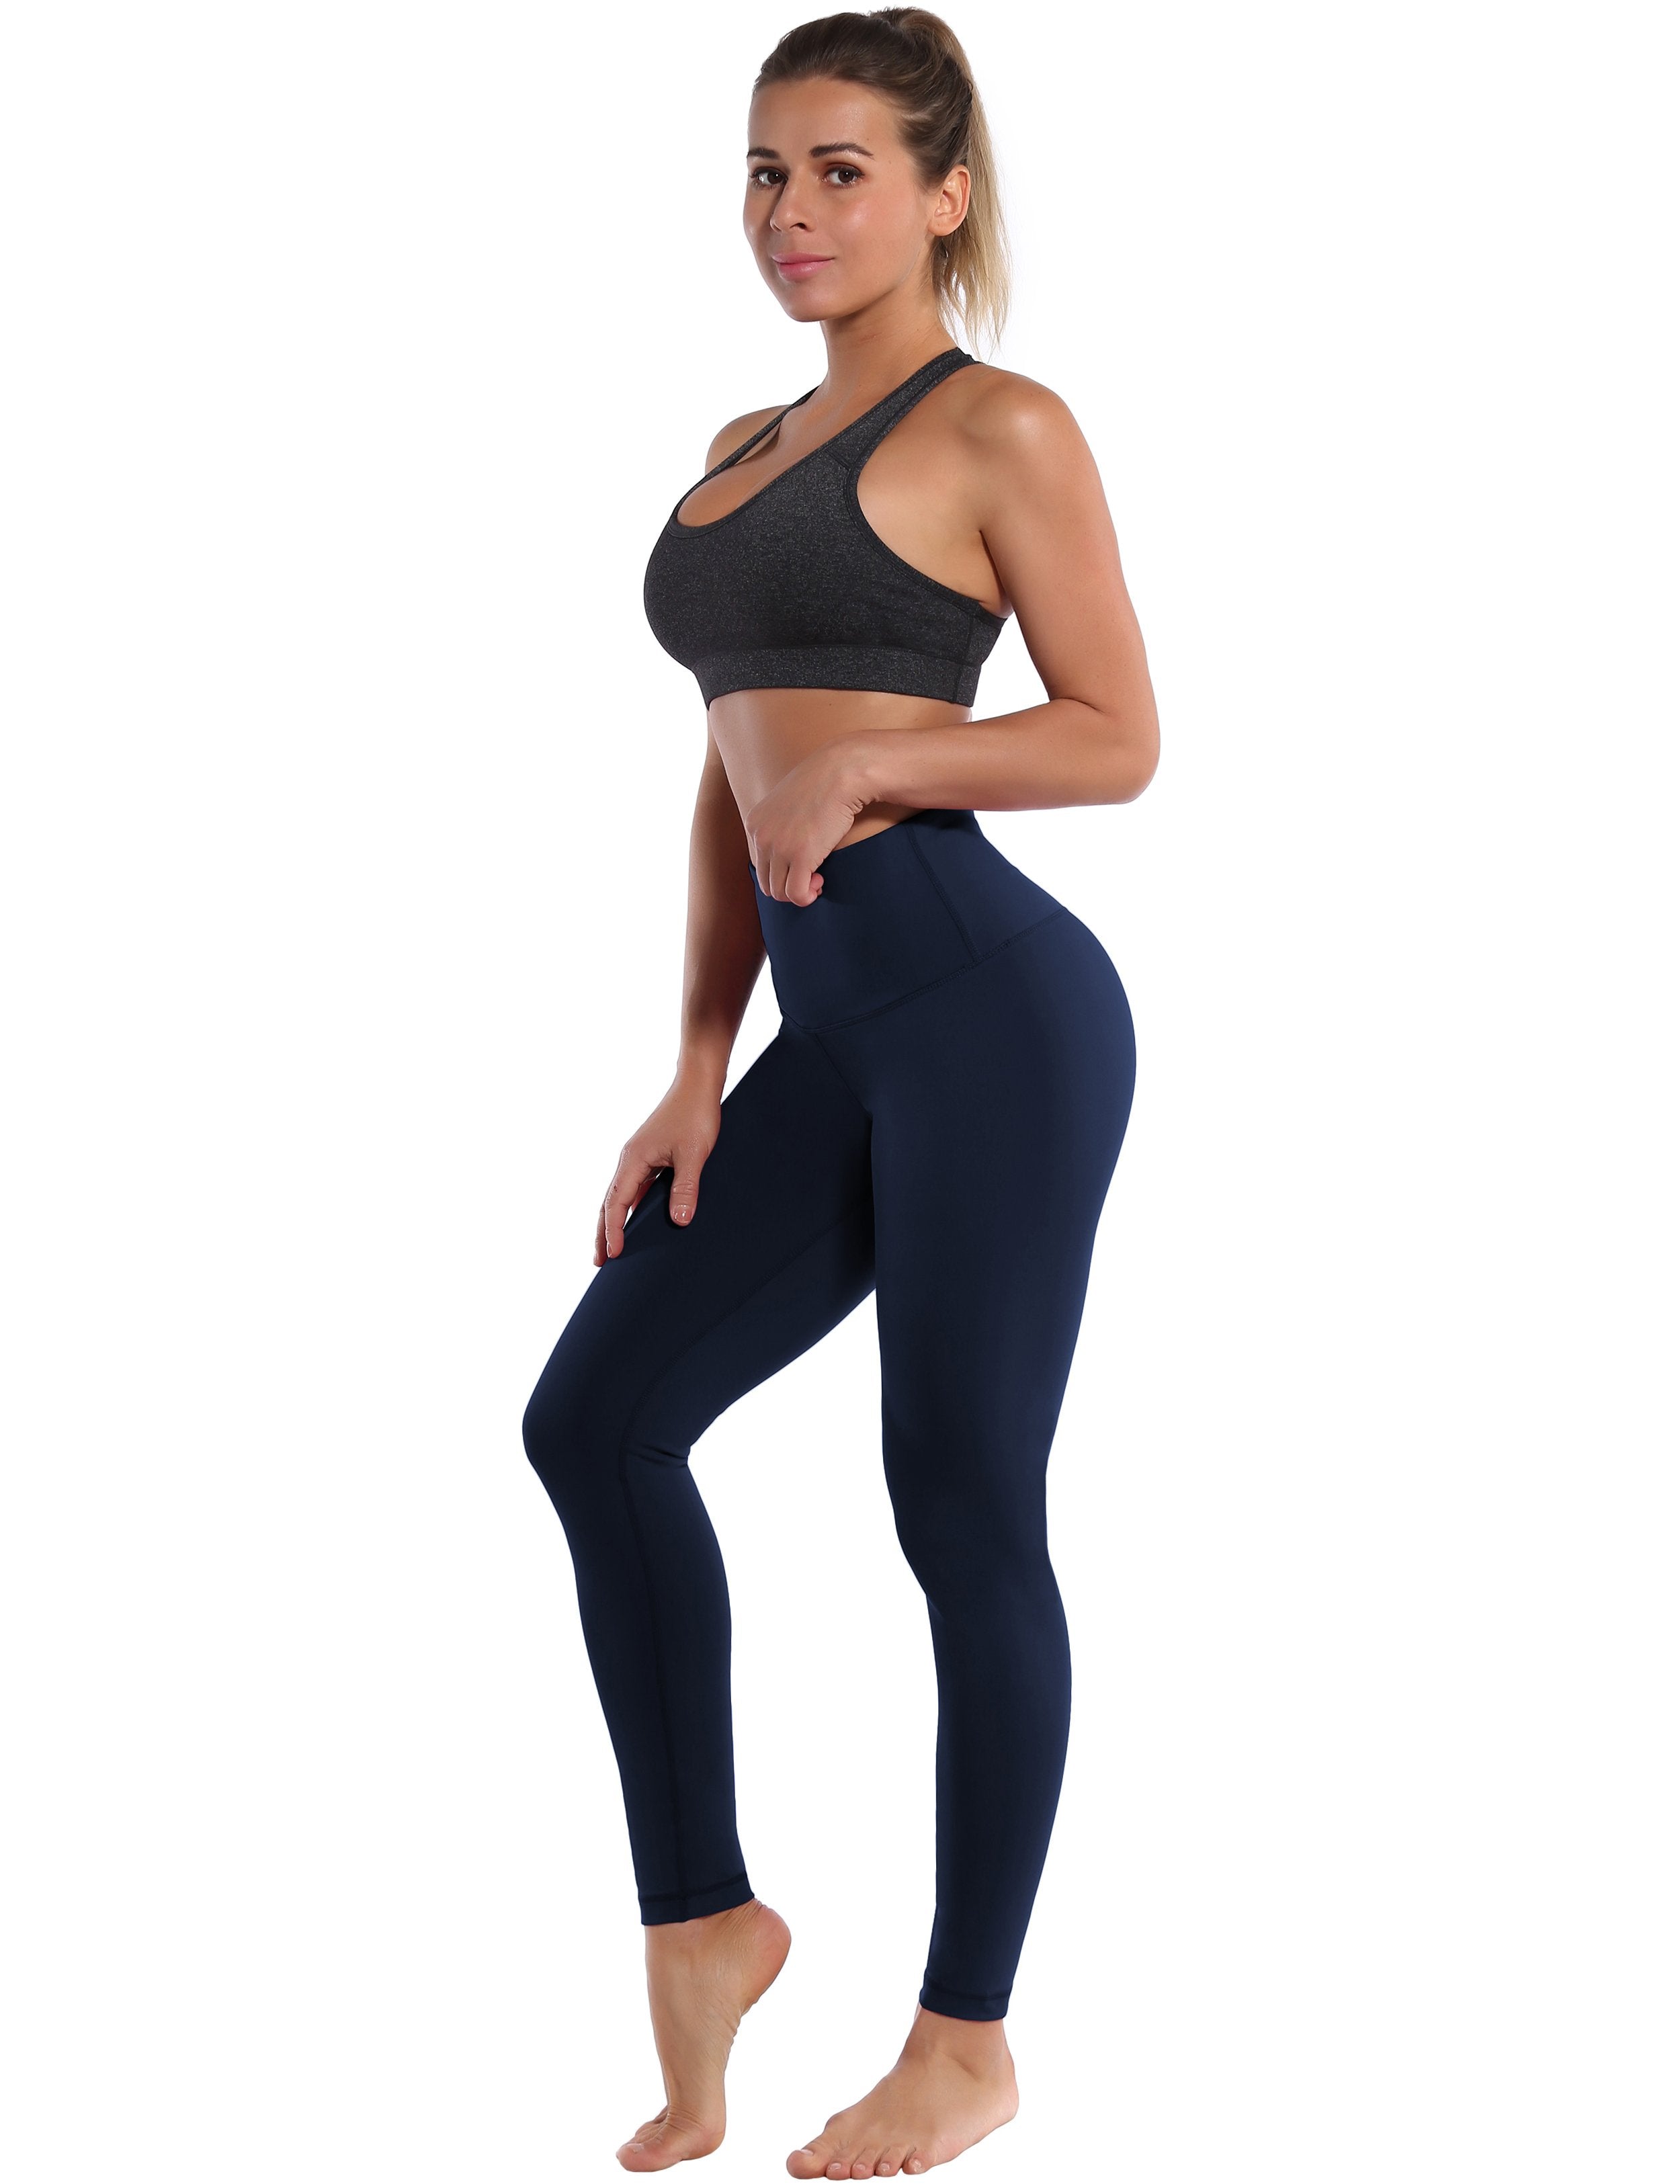 High Waist Gym Pants darknavy 75%Nylon/25%Spandex Fabric doesn't attract lint easily 4-way stretch No see-through Moisture-wicking Tummy control Inner pocket Four lengths